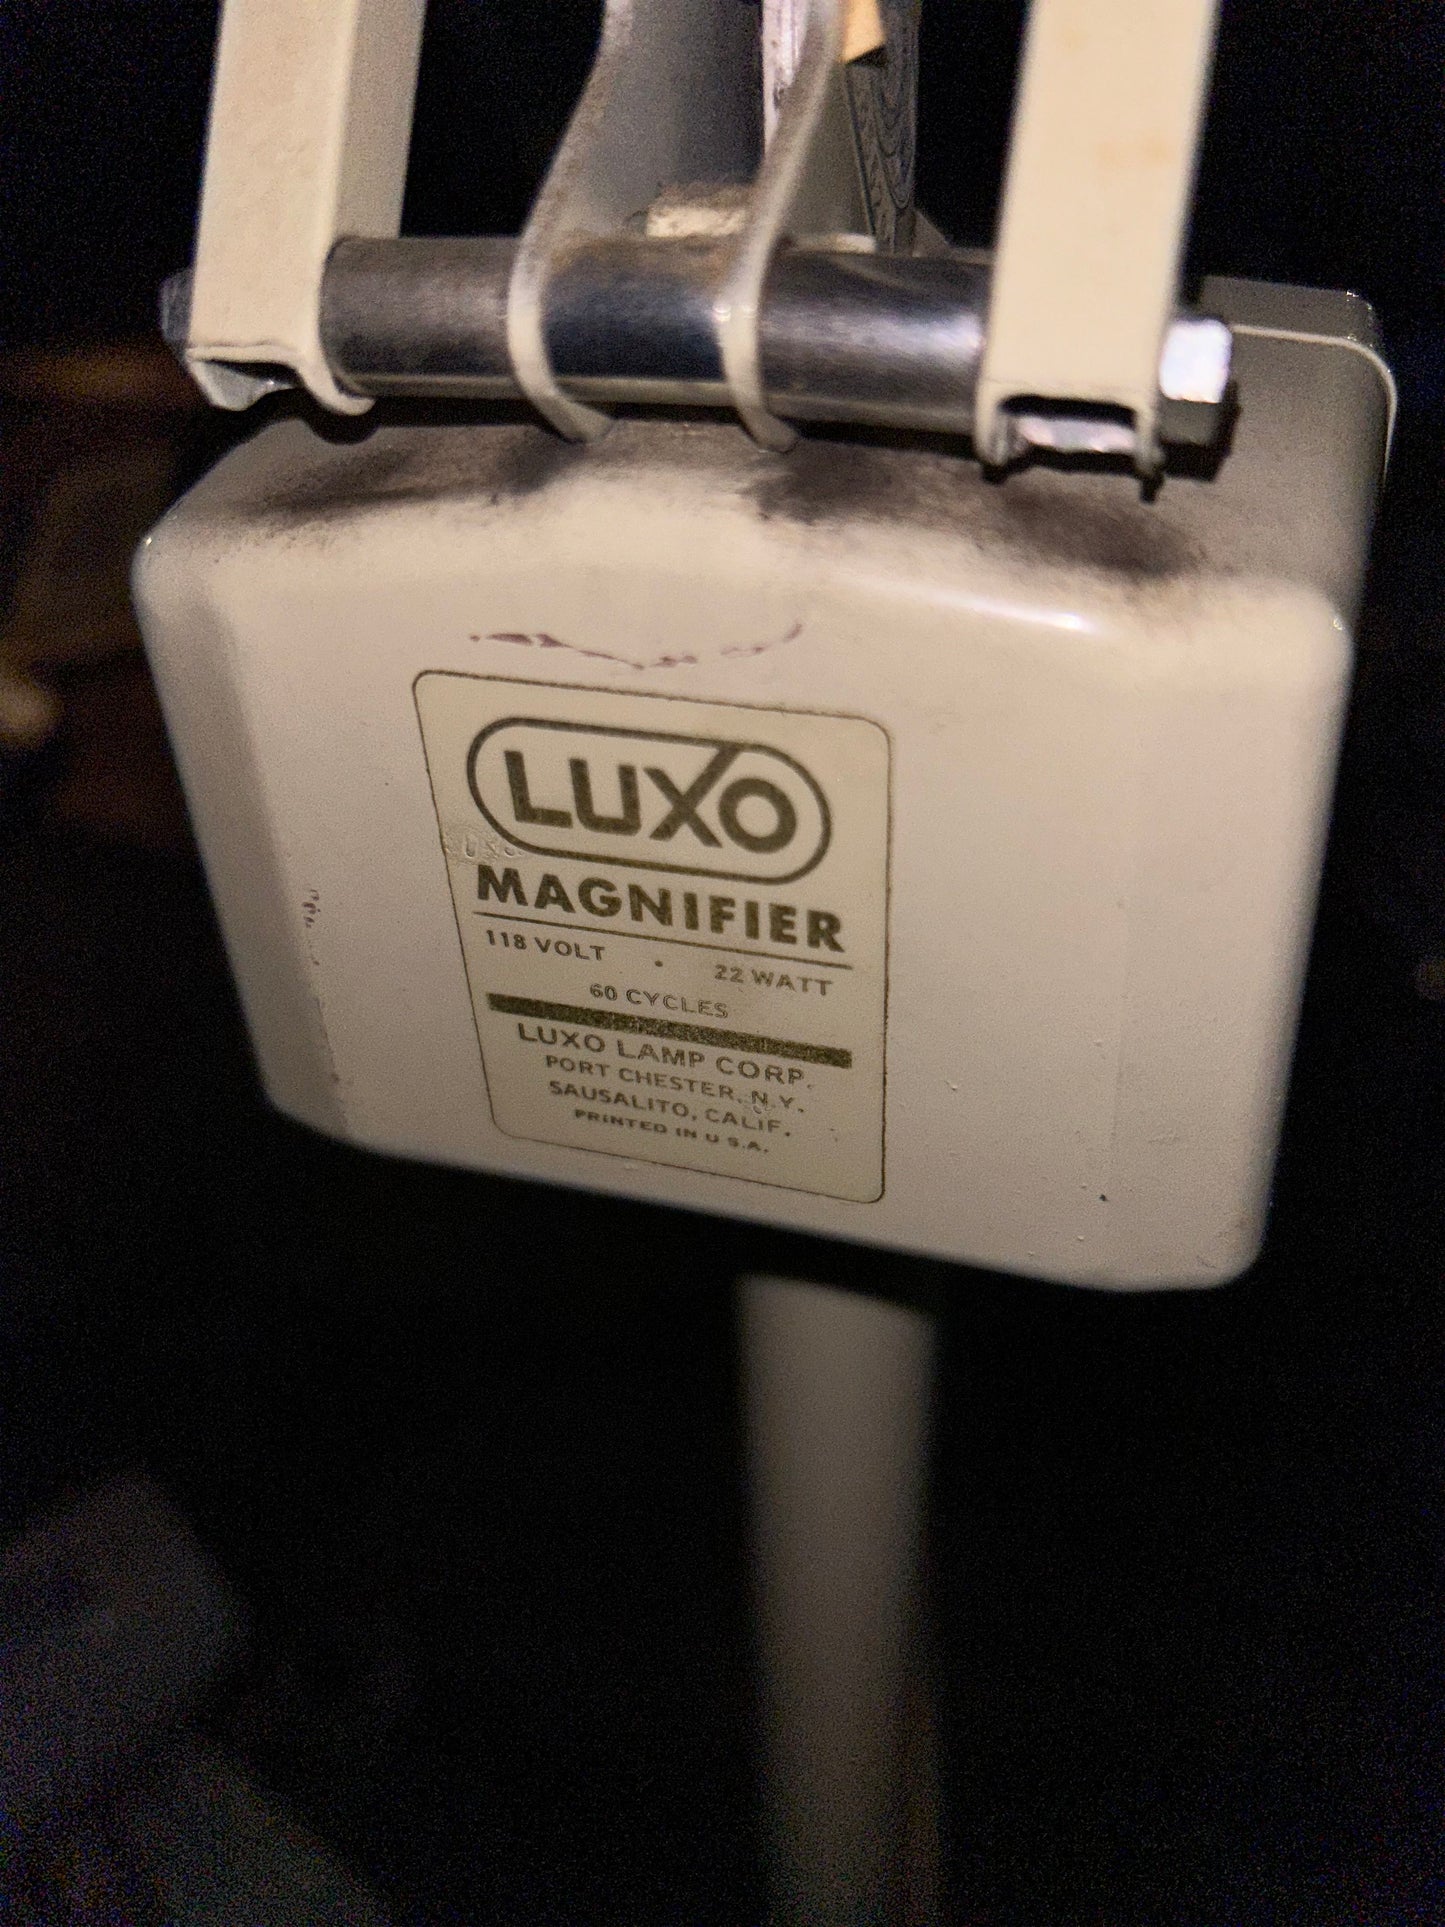 Vintage 1970s Luxo Magnifier Articulating Lamp with Stand - Excellent Condition